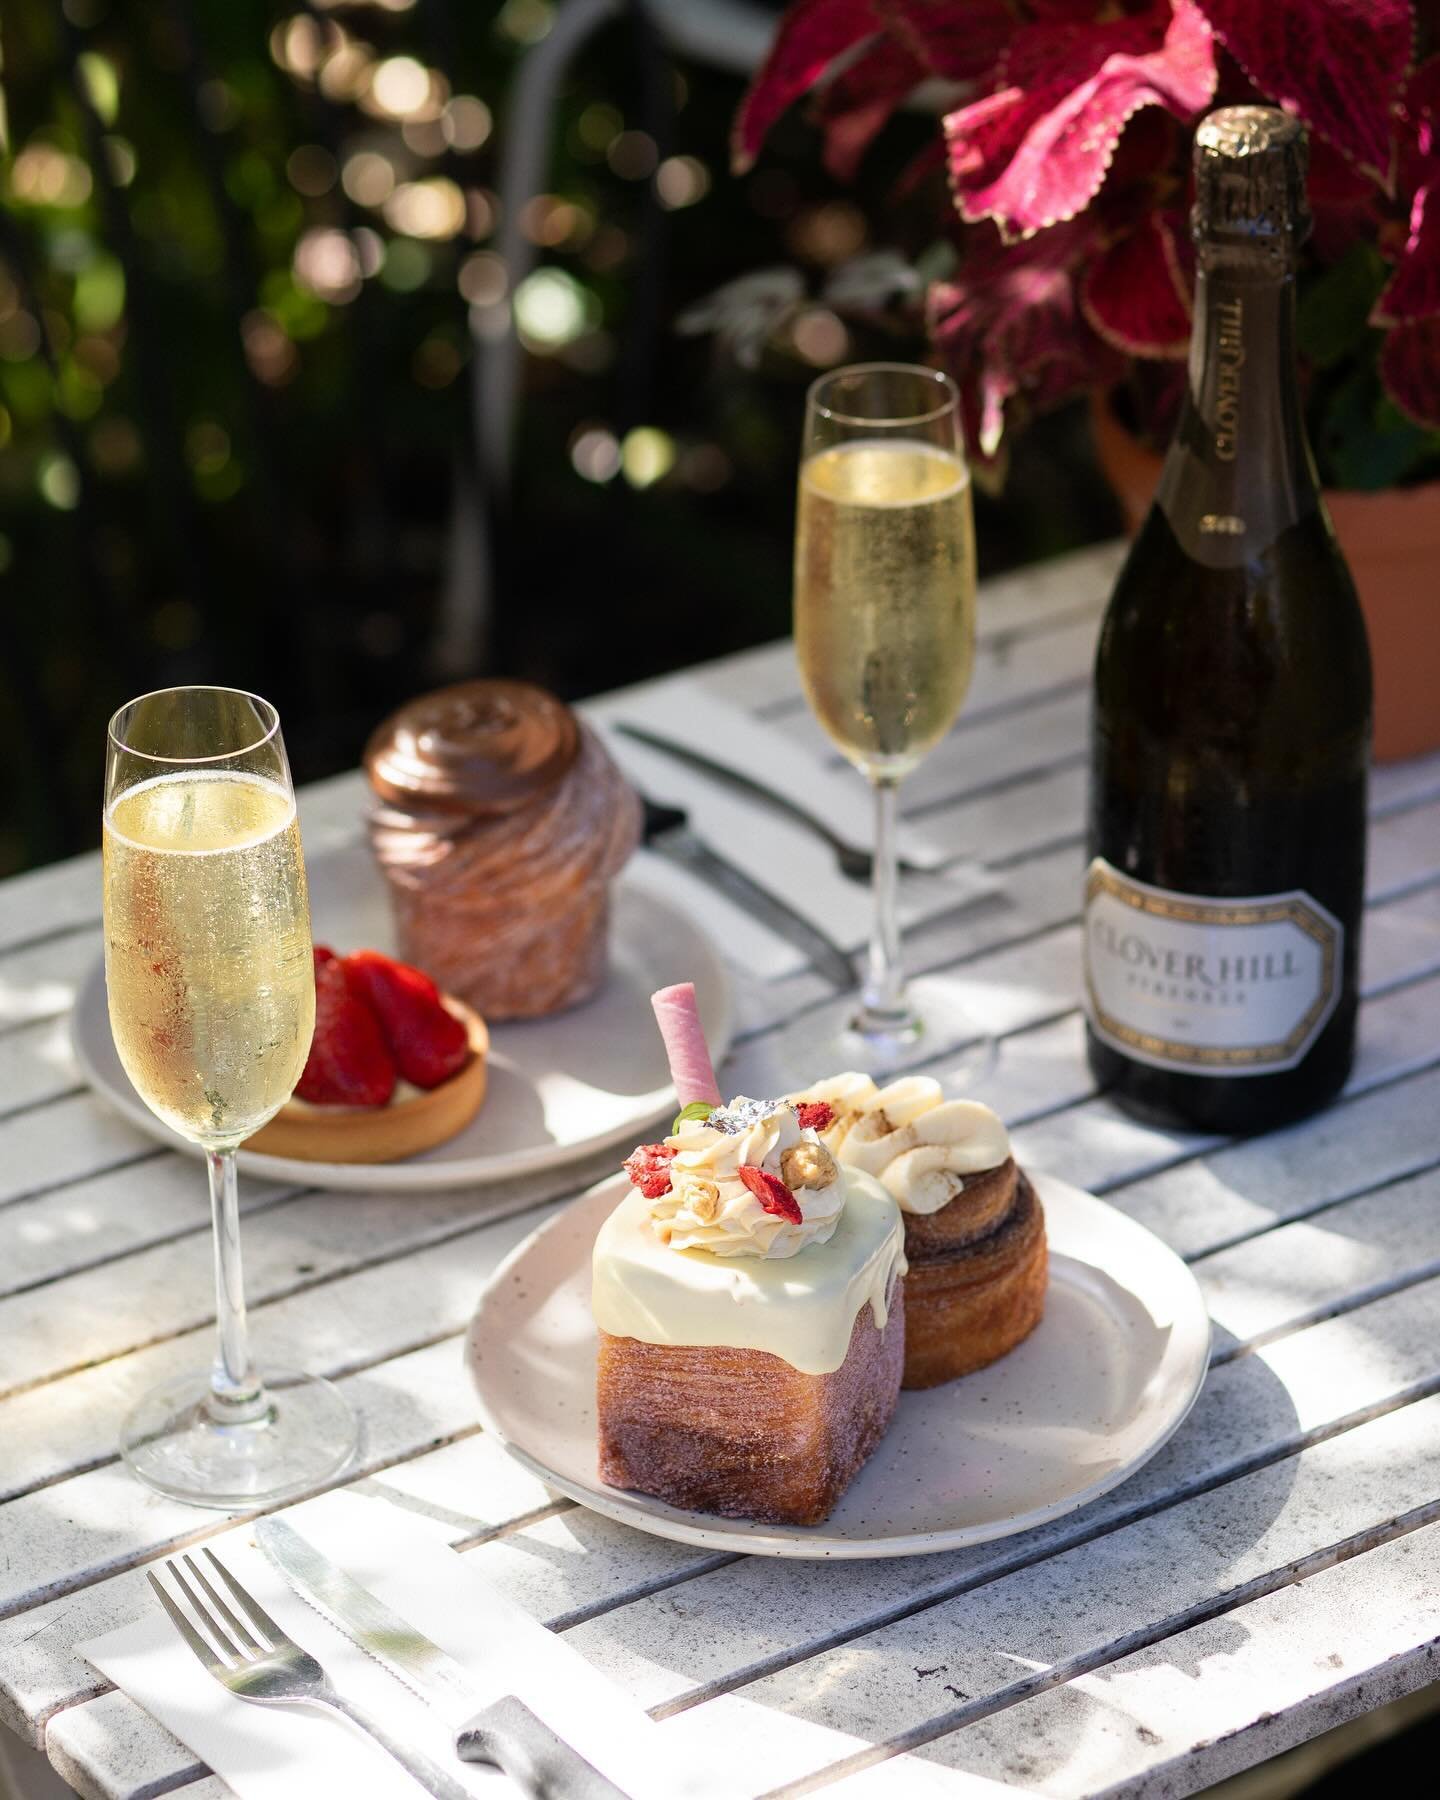 Pastries and Prosecco anyone? Looking to celebrate an occasion with a sweet treat ? 🧁🥂

we&rsquo;ve got you covered at Paddock Bakery 🤍

GEELONG OPEN NOW ‼️ 7am-4pm &bull; 7 days
BURLEIGH &bull; 6am-3pm &bull; 7 days